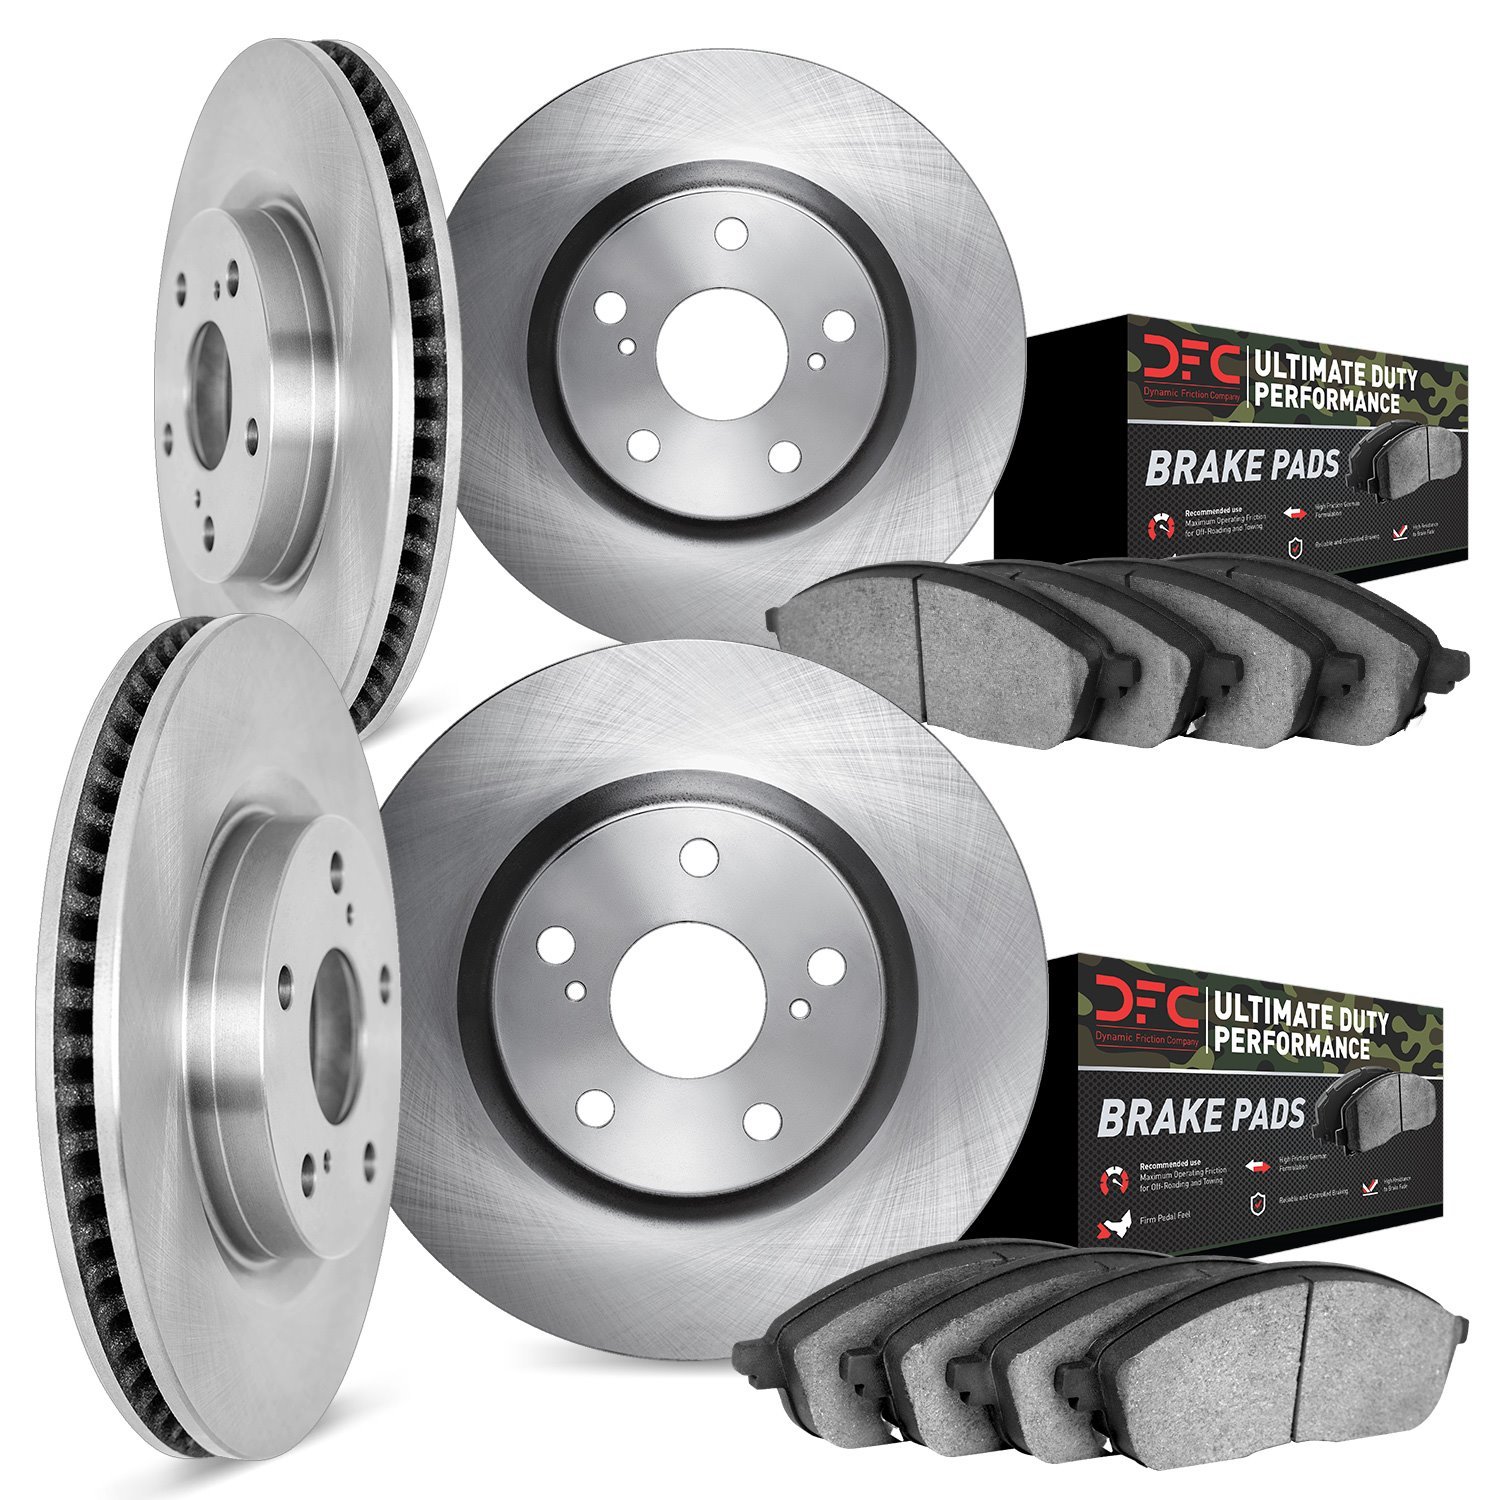 6404-42017 Brake Rotors with Ultimate-Duty Brake Pads, Fits Select Mopar, Position: Front and Rear